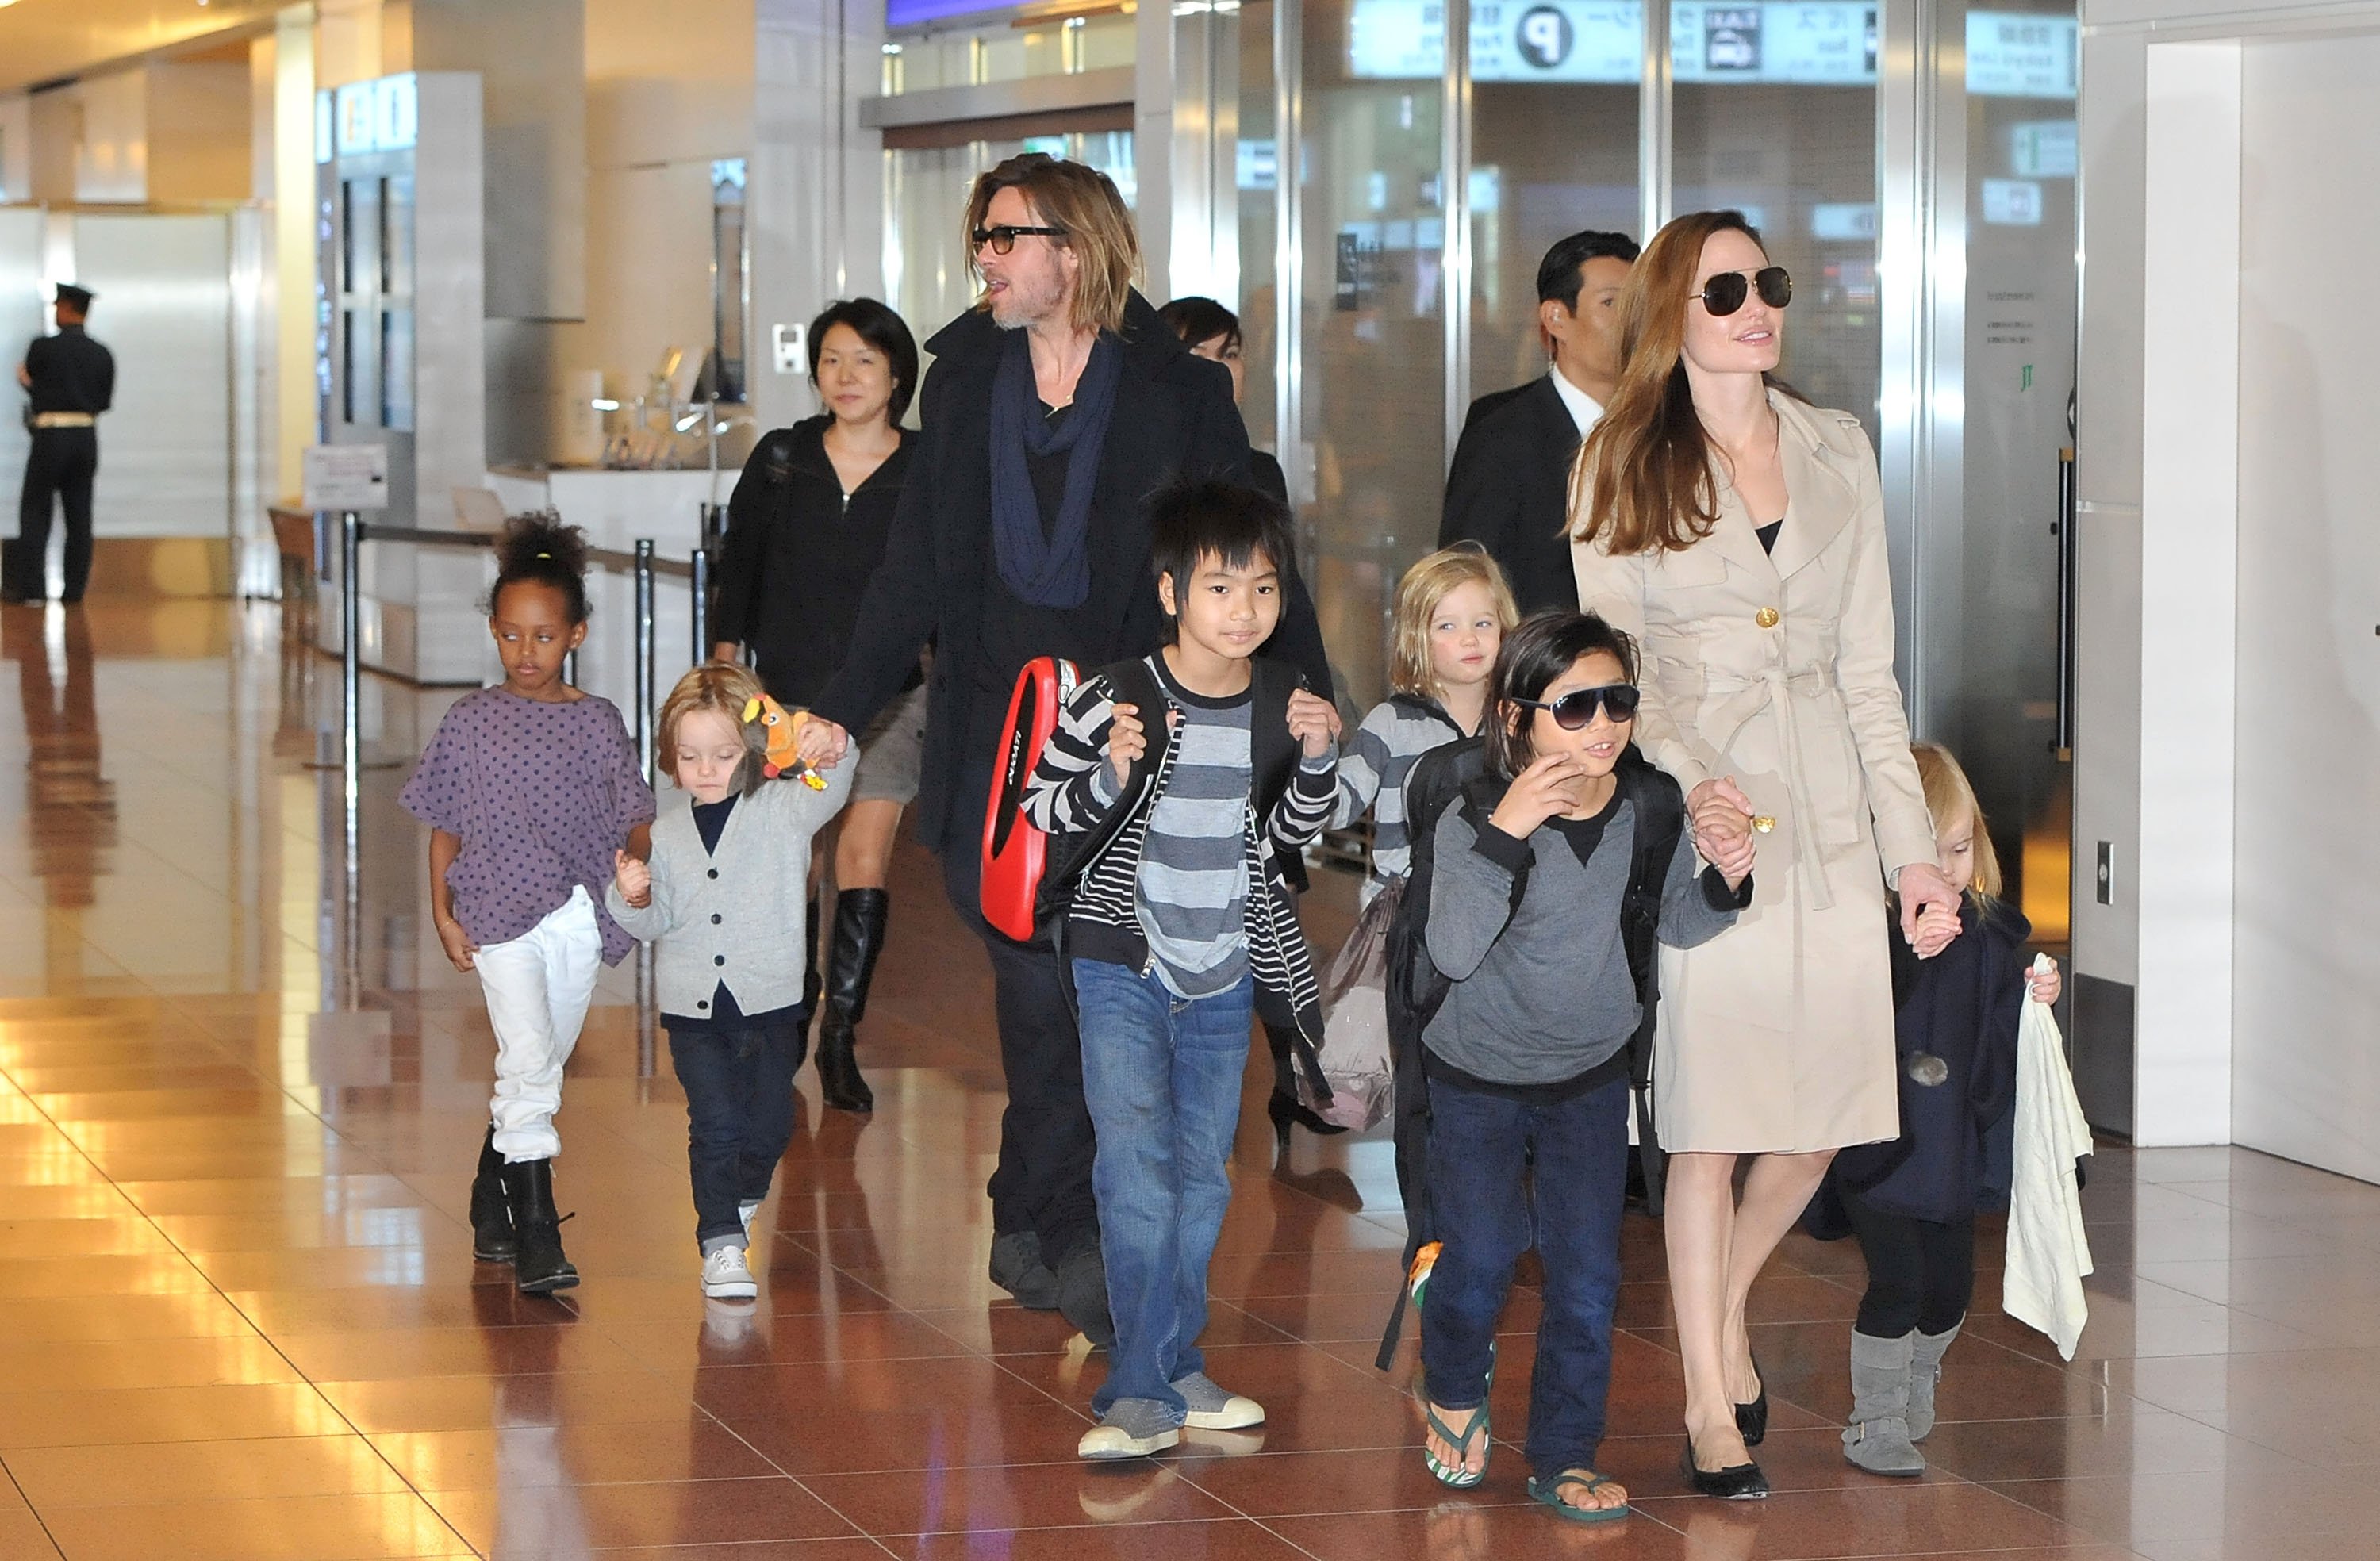 Brad Pitt, Angelina Jolie and their six children Maddox, Pax, Zahara, Shiloh, Knox, and Vivienne at Haneda International Airport on November 8 in Tokyo, Japan | Source: Getty Images